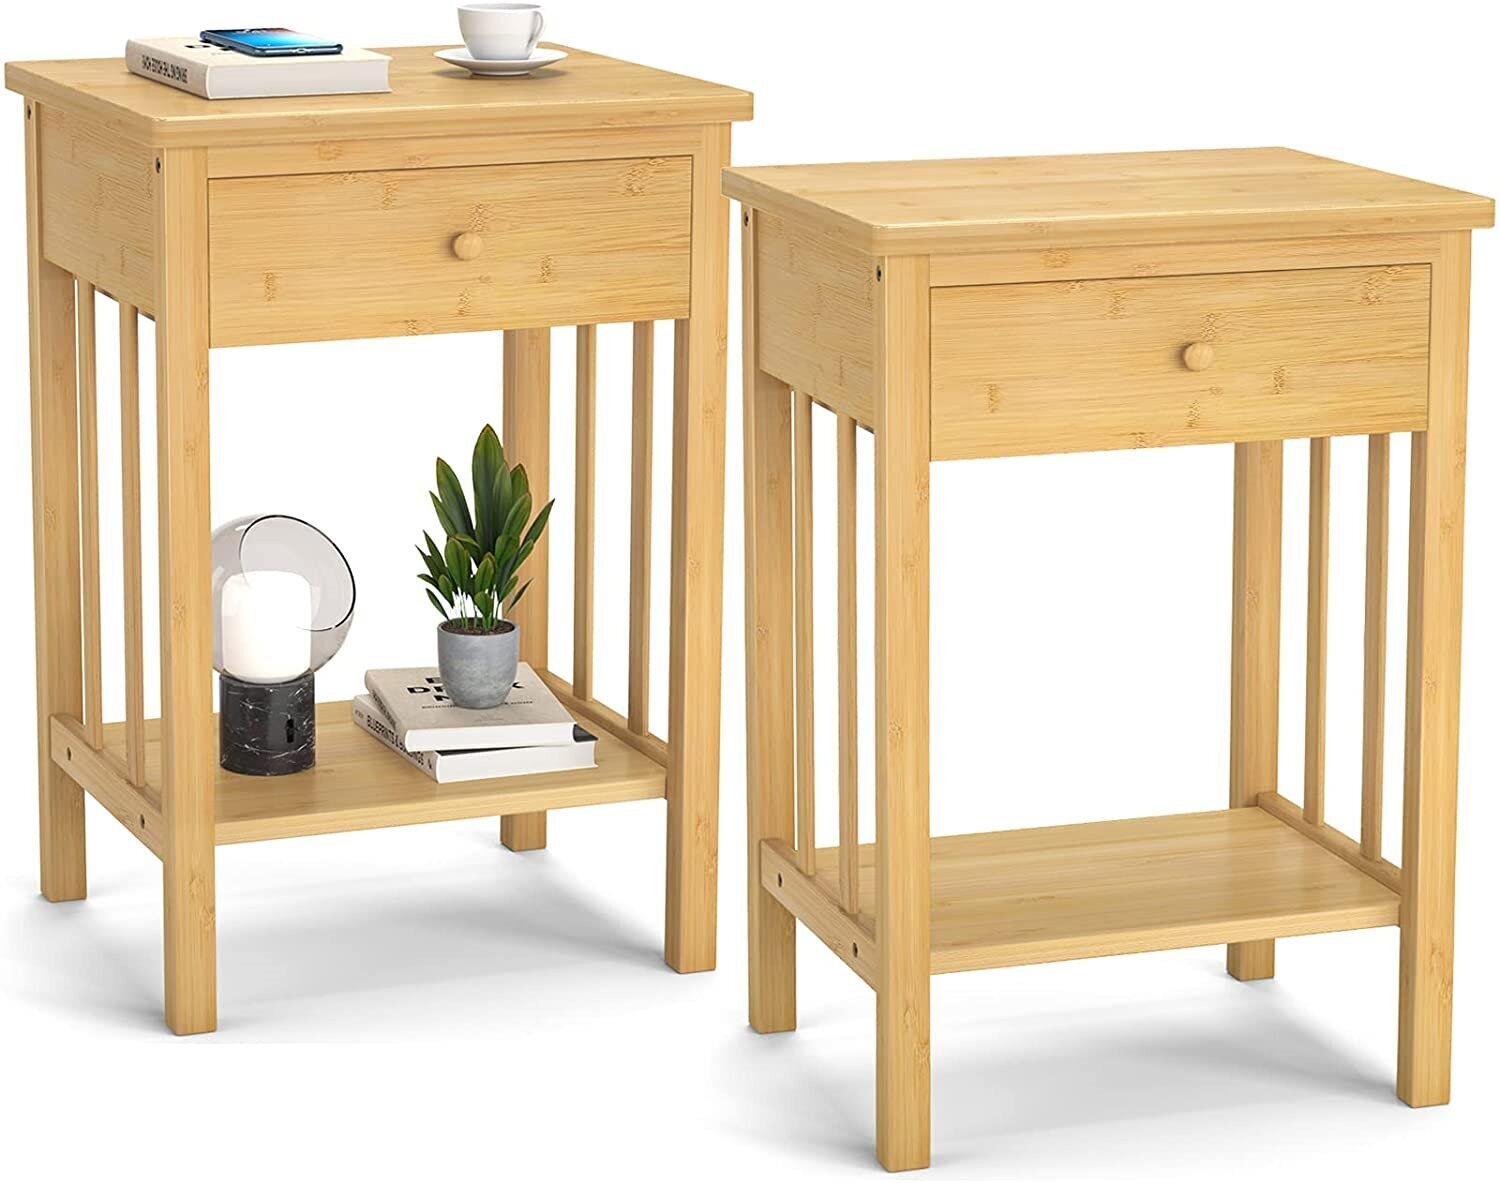 Set of bamboo end tables